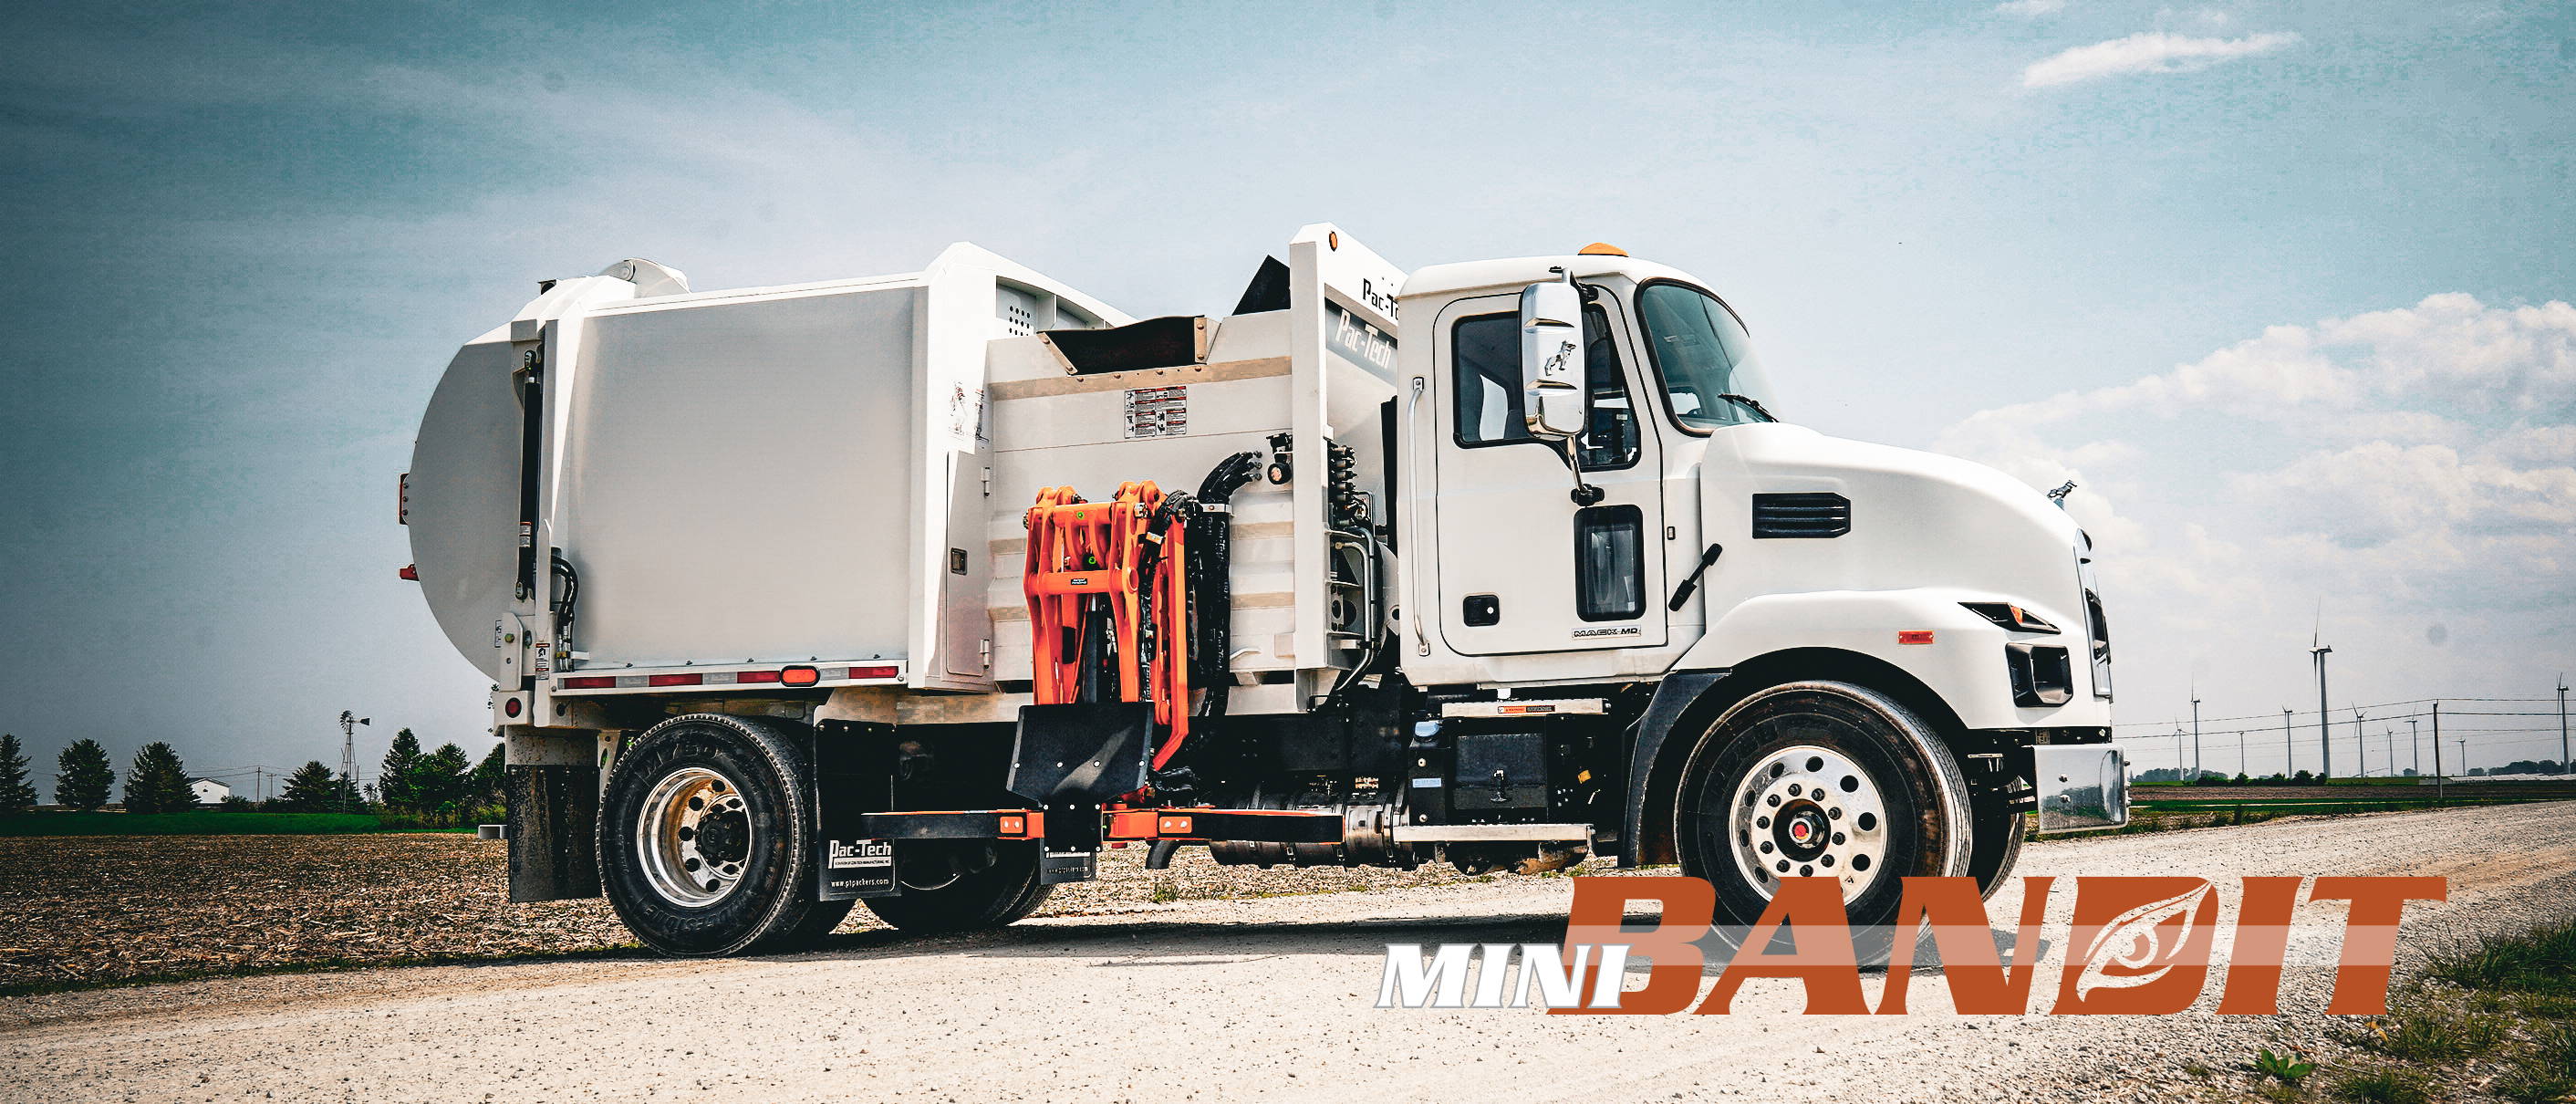 MiniBandit Automated Side Loader Garbage Truck